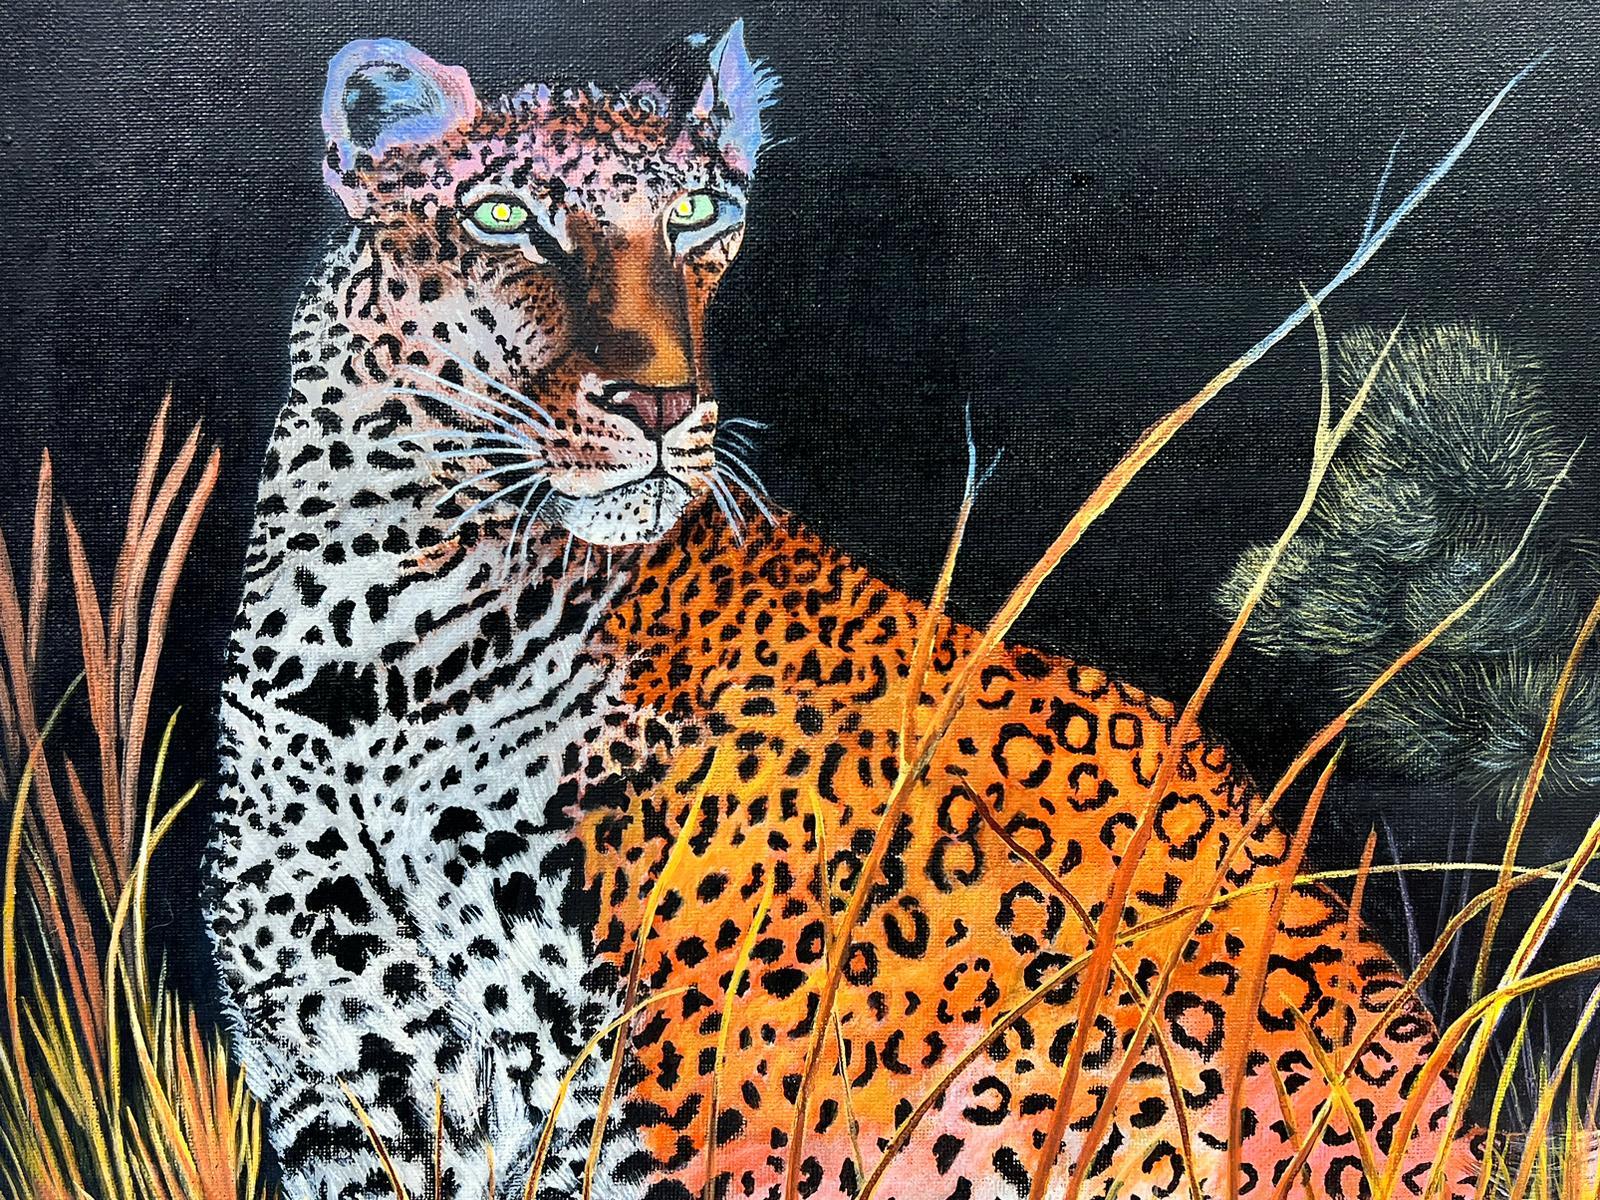 Cheetah 
by Ben George Powell, British contemporary artist
signed and dated 2014
acrylic on canvas unframed
canvas: 16 x 20 inches
provenance: private collection of this artists work, UK
The painting is in very good and presentable condition.
